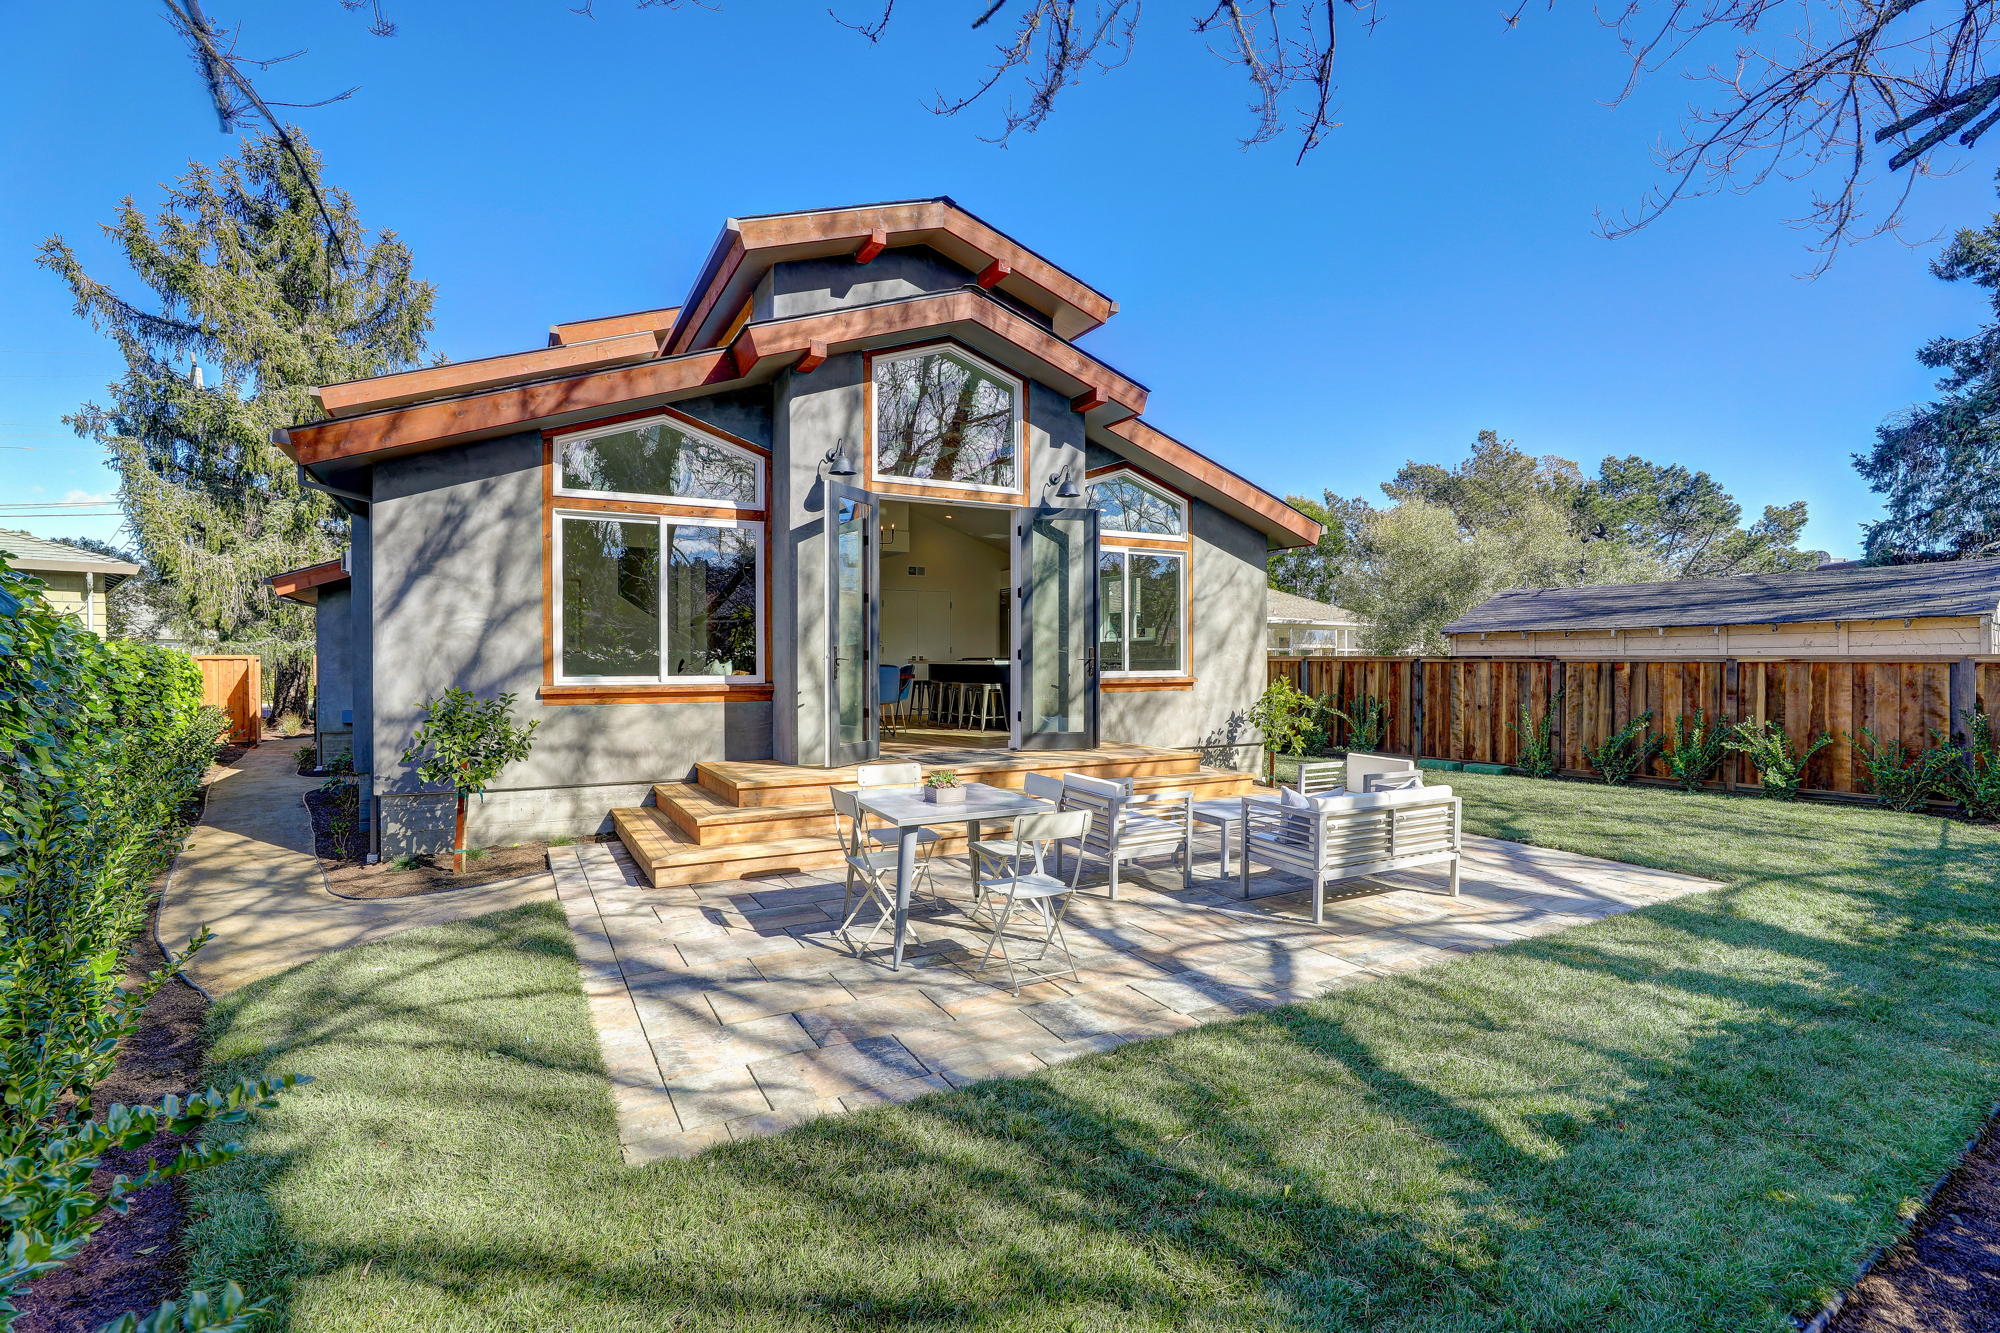 38 Ryan Avenue, Mill Valley - Sycamore Park Homes for sale - 56- Listed by Team Own Marin with Compass Real Estate.jpg